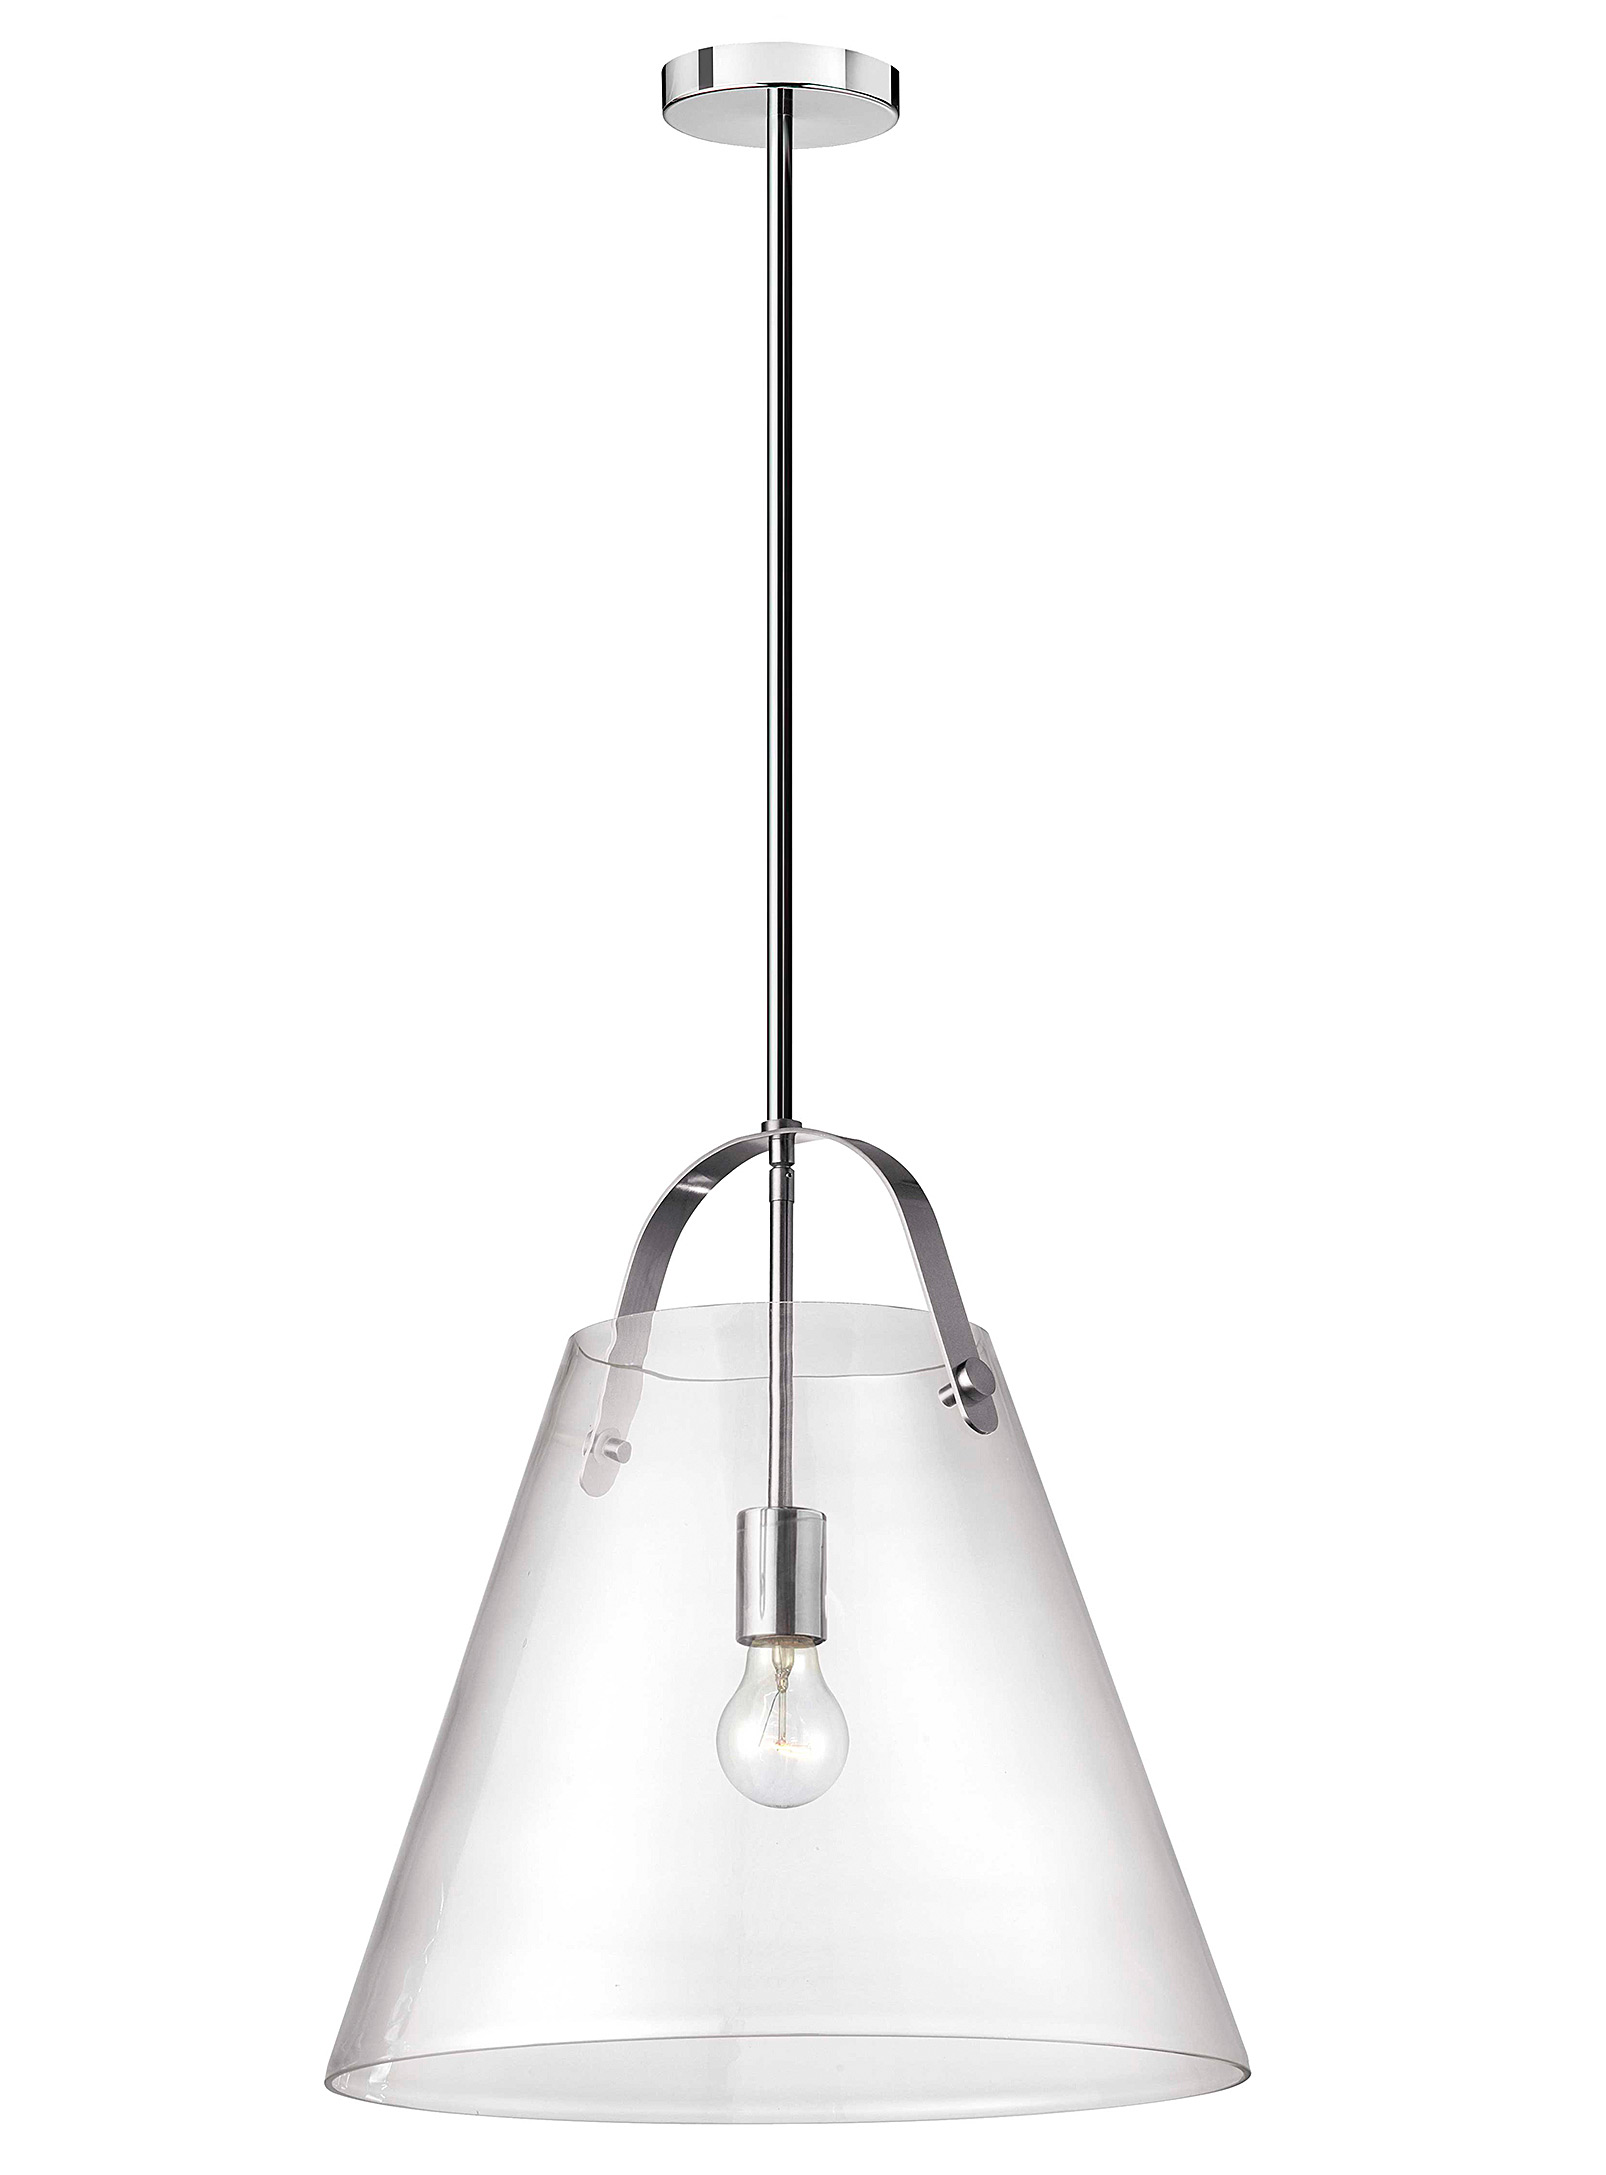 Simons Maison Large Crystalline Chrome Hanging Lamp In Silver